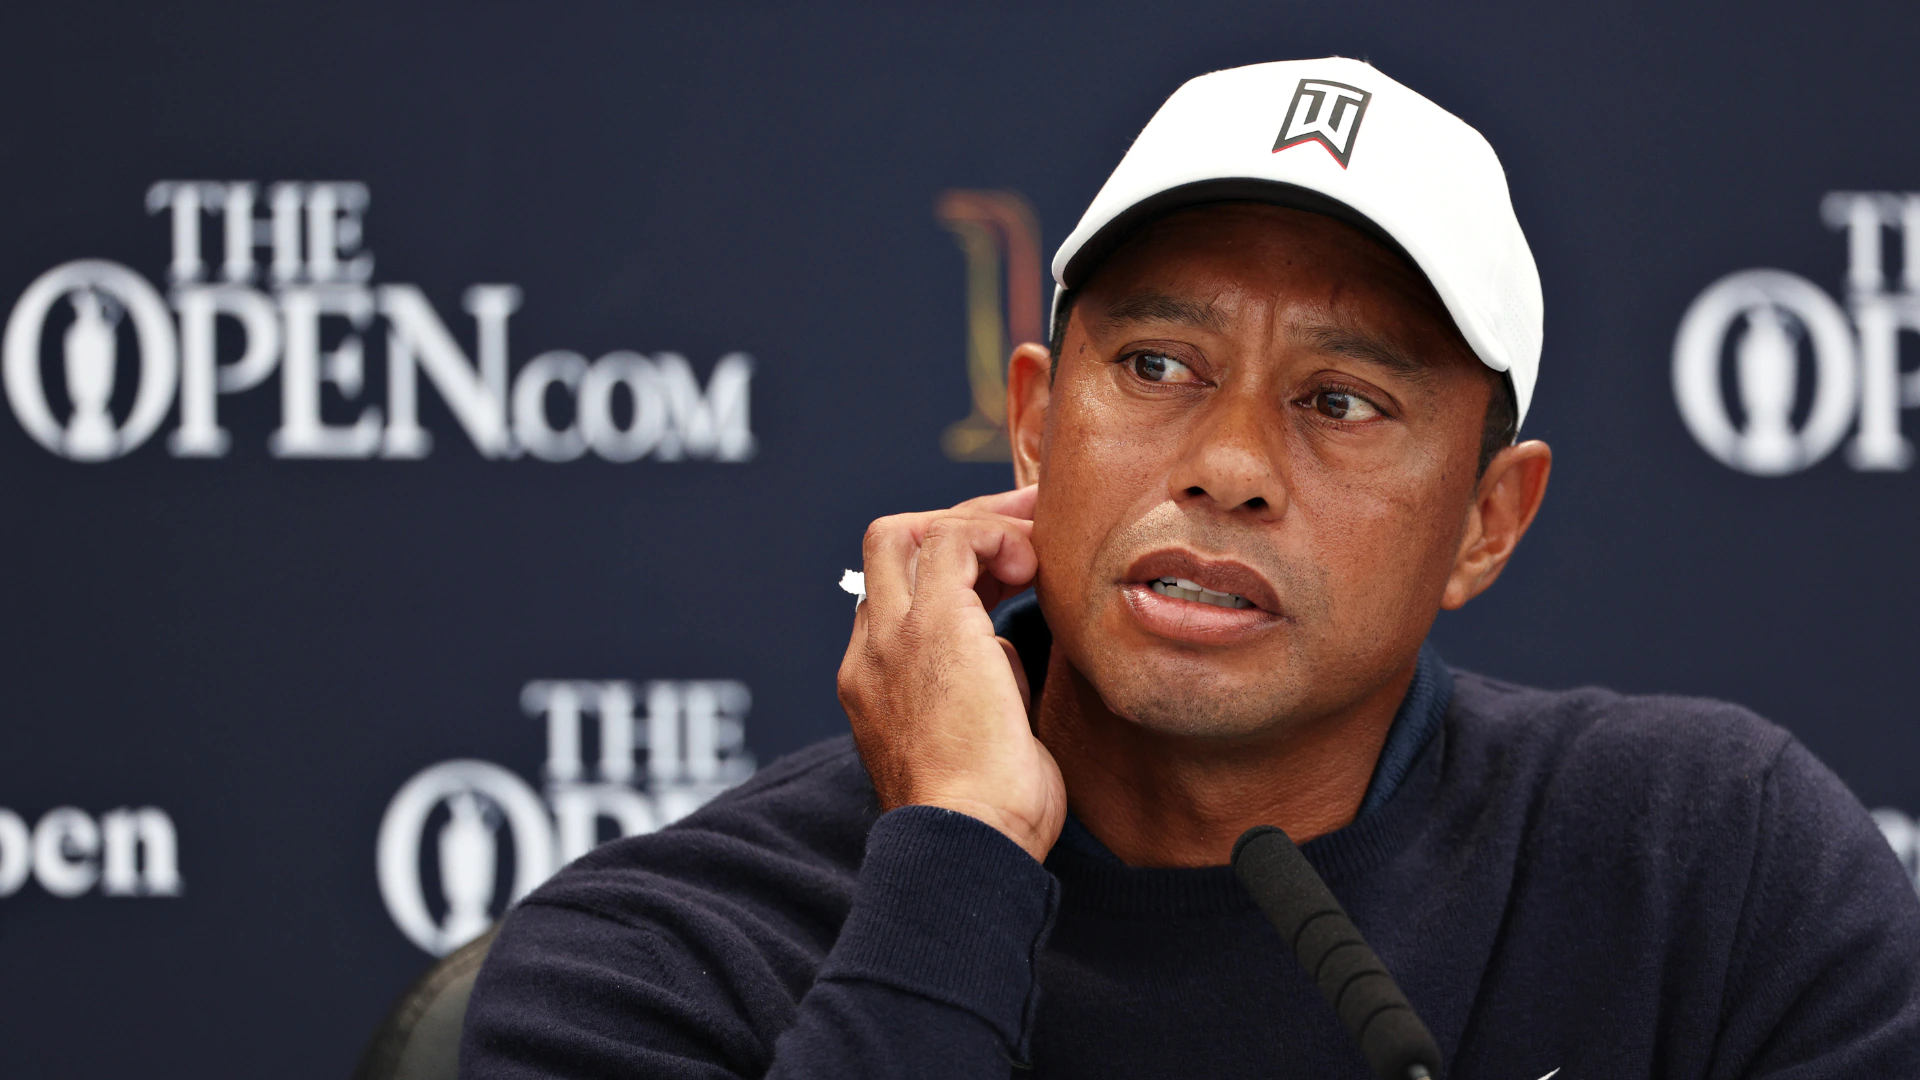 2022 British Open: Tiger Woods has big voice, just not as much visibility